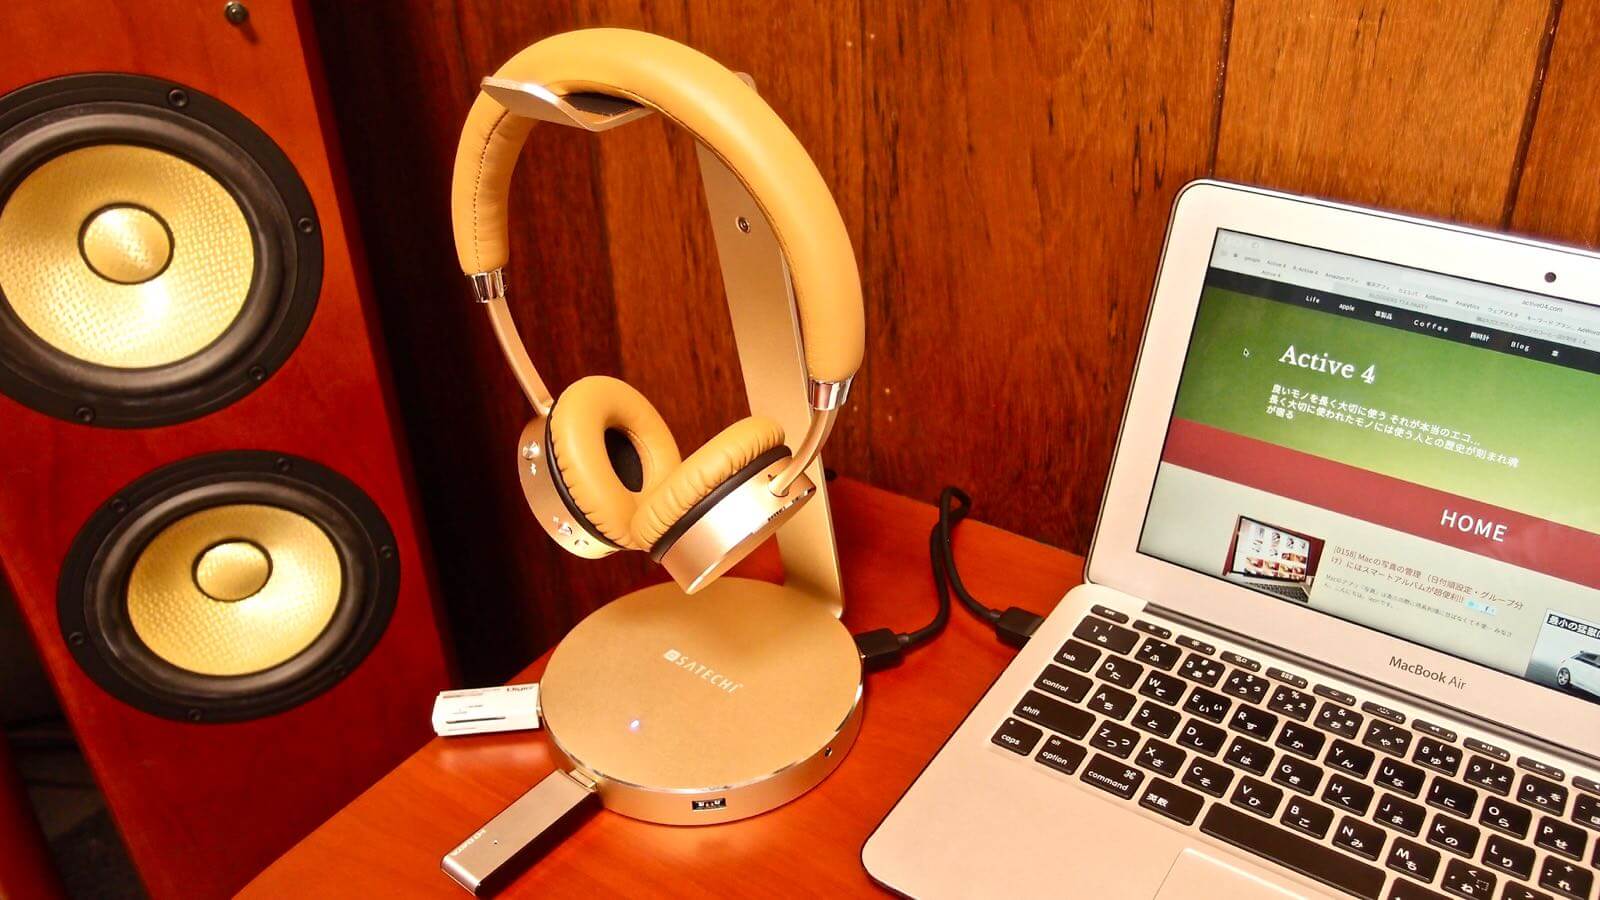 0160 Satechi s Headphone Stand Review 15